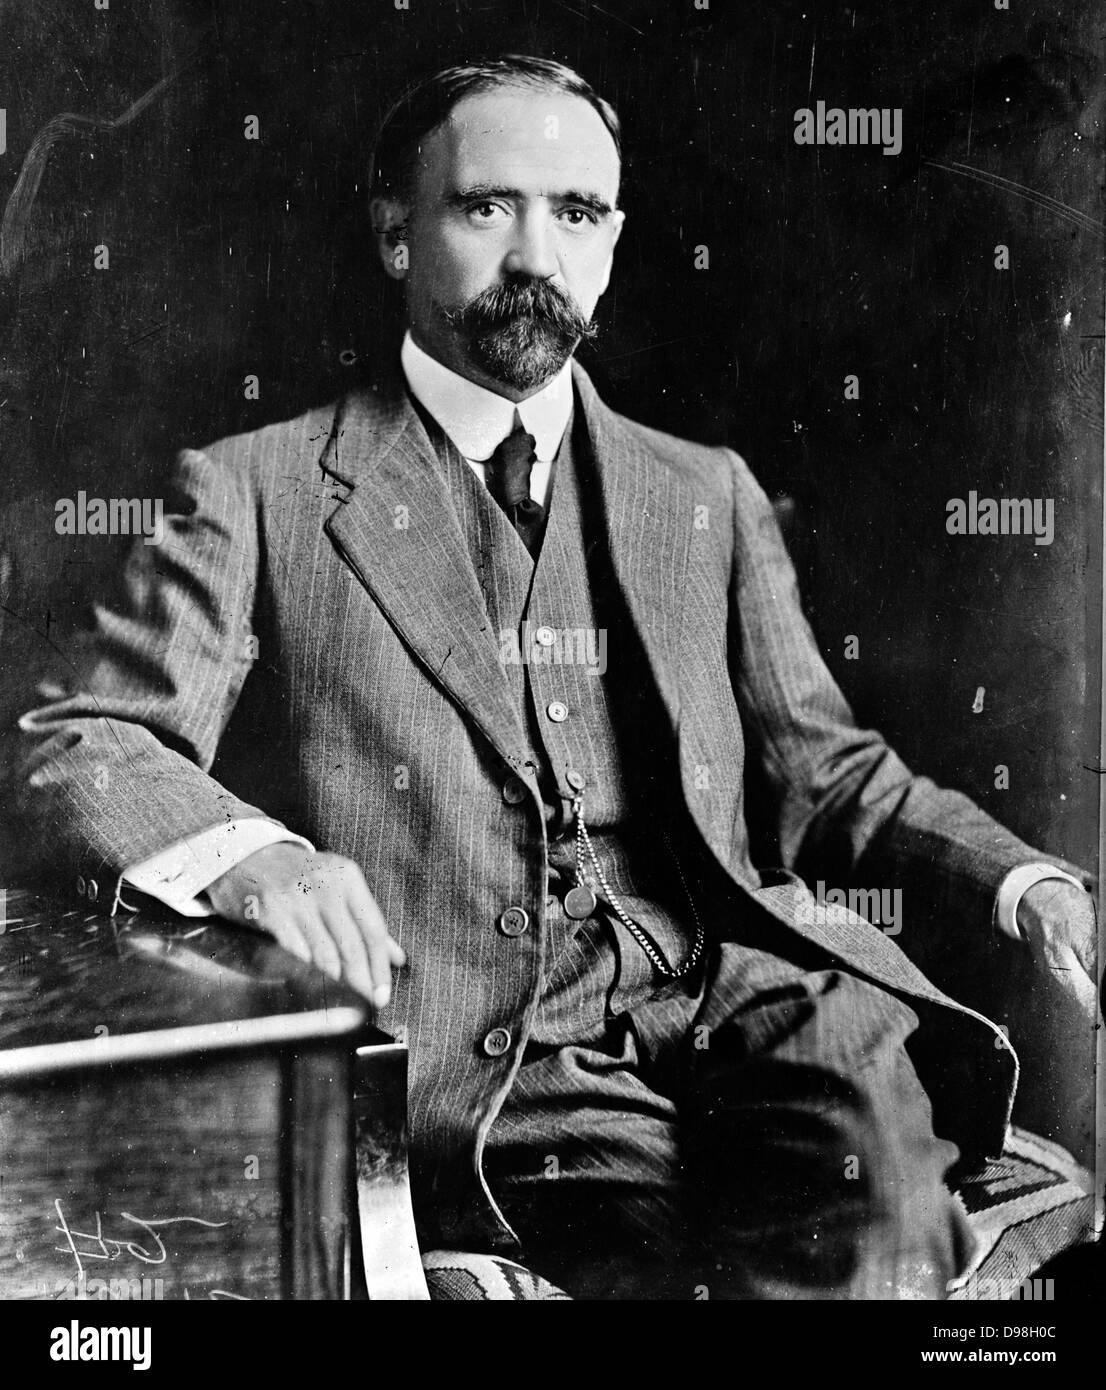 Francisco Ignacio Madero González[3][4][5] (October 30, 1873 – February 22, 1913) was a politician, writer and revolutionary who served as President of Mexico from 1911 to 1913 Stock Photo